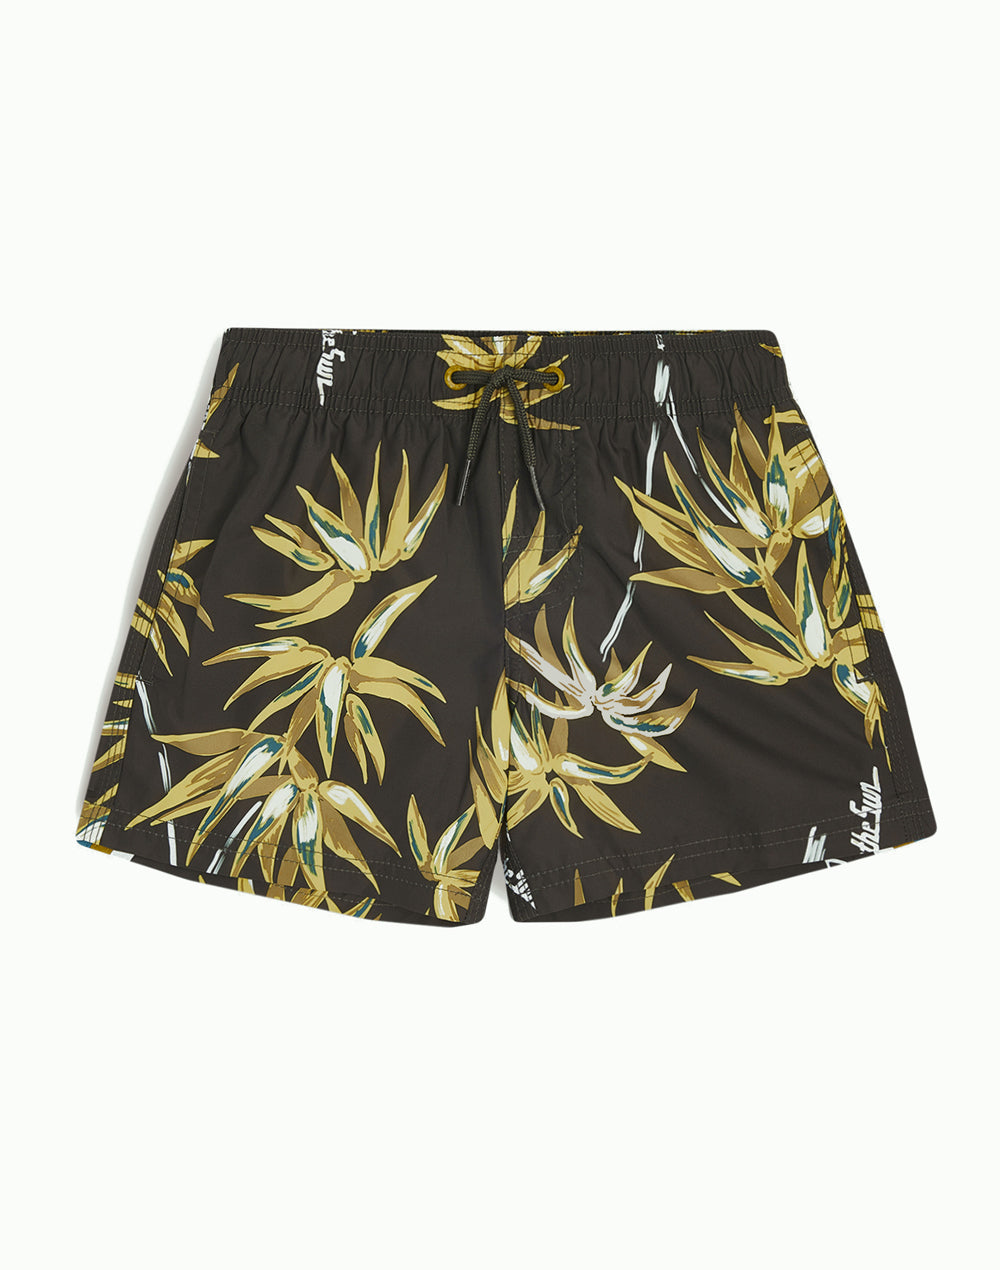 PRINTED BOARDSHORT-GO FOR THE SUN PRINT